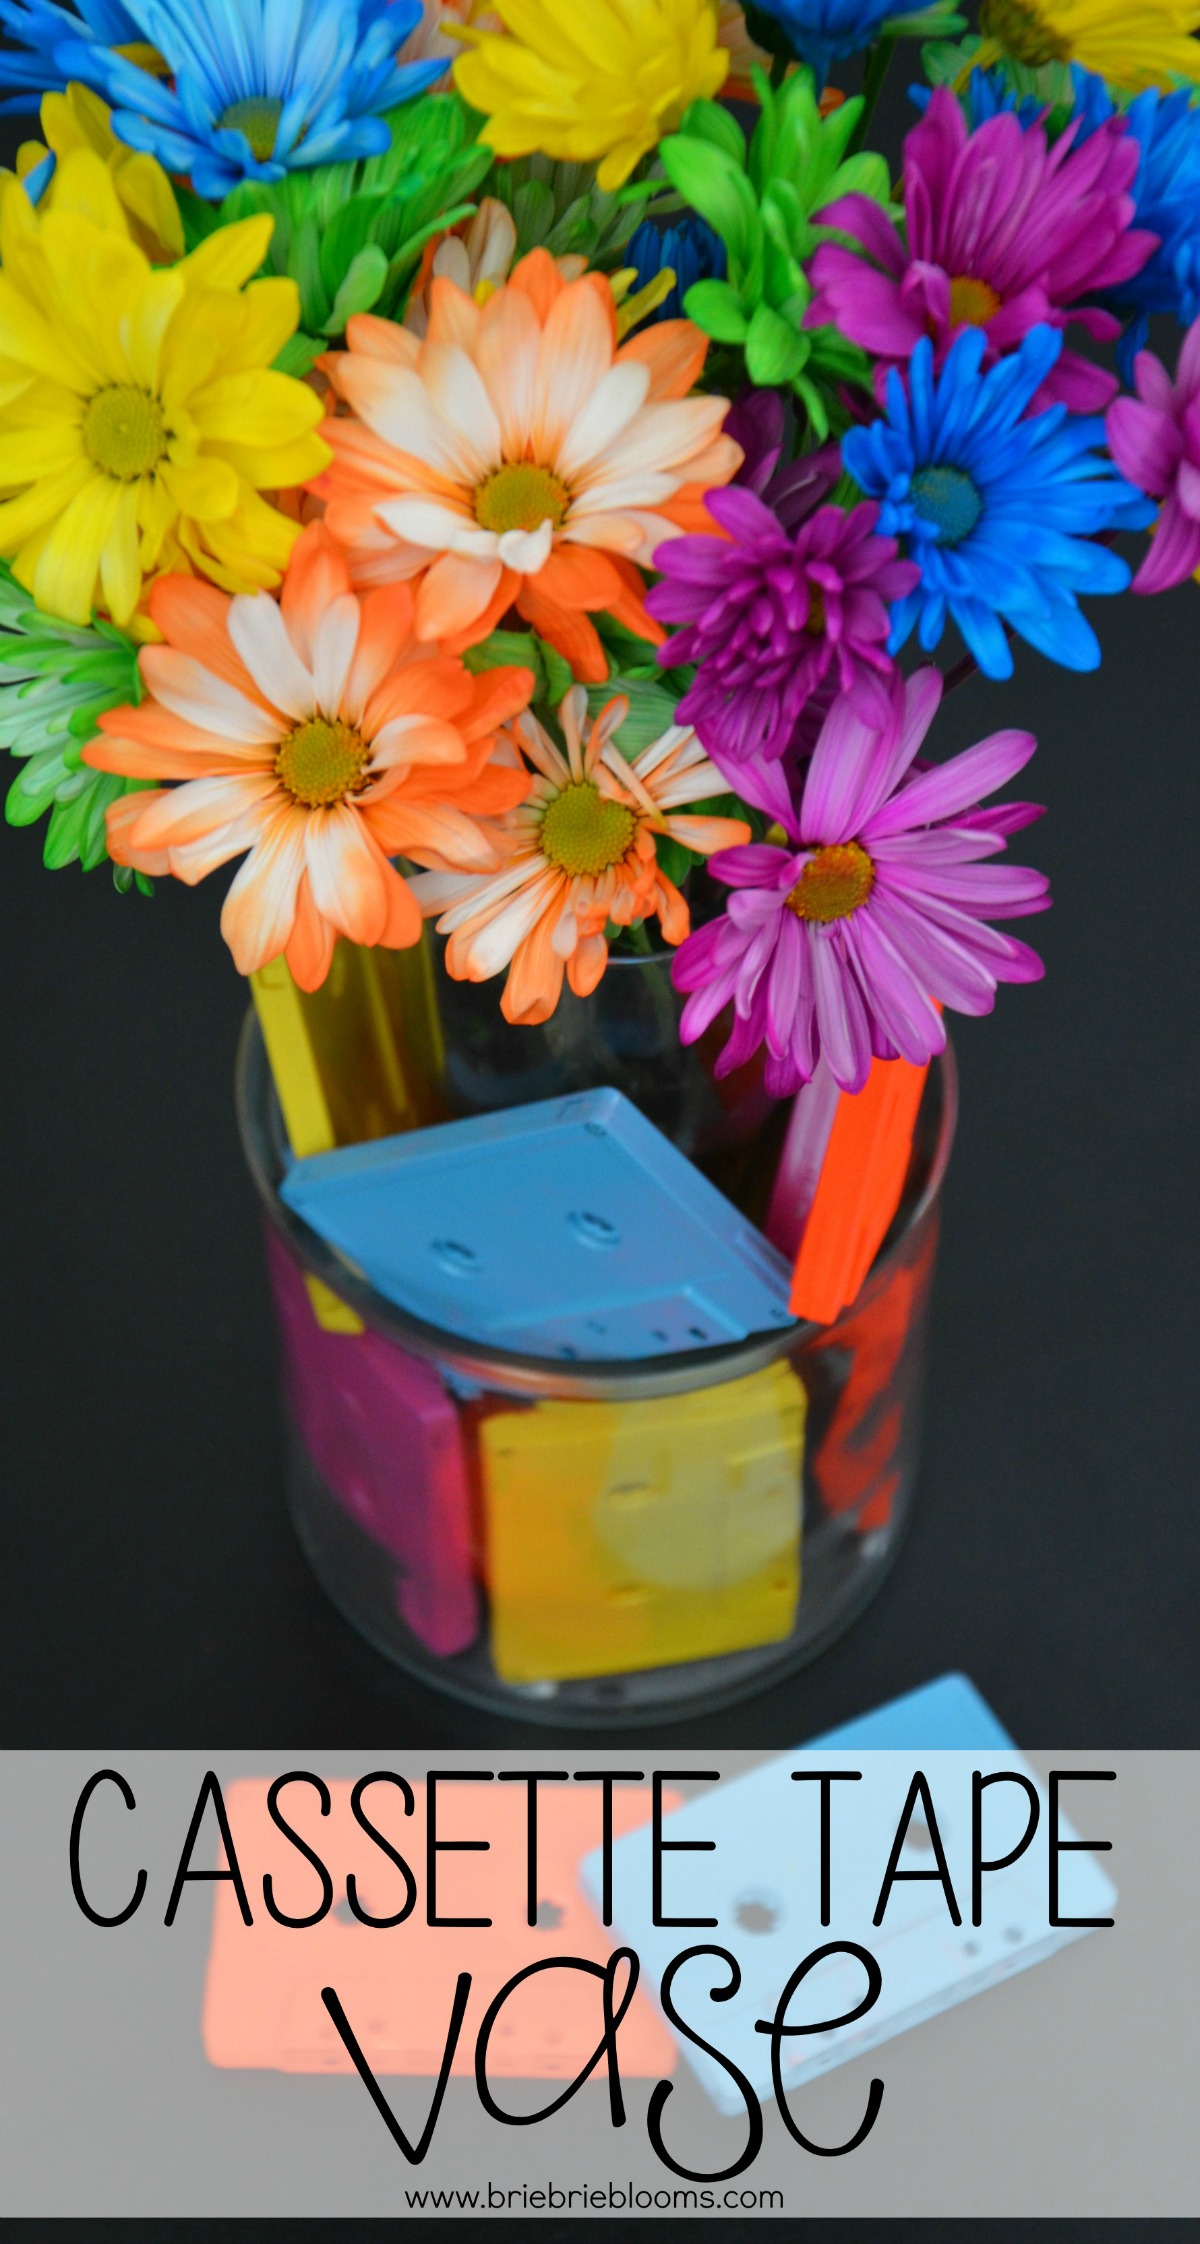 Make this fun cassette tape vase by spray painting blank cassette tapes with neon colors.